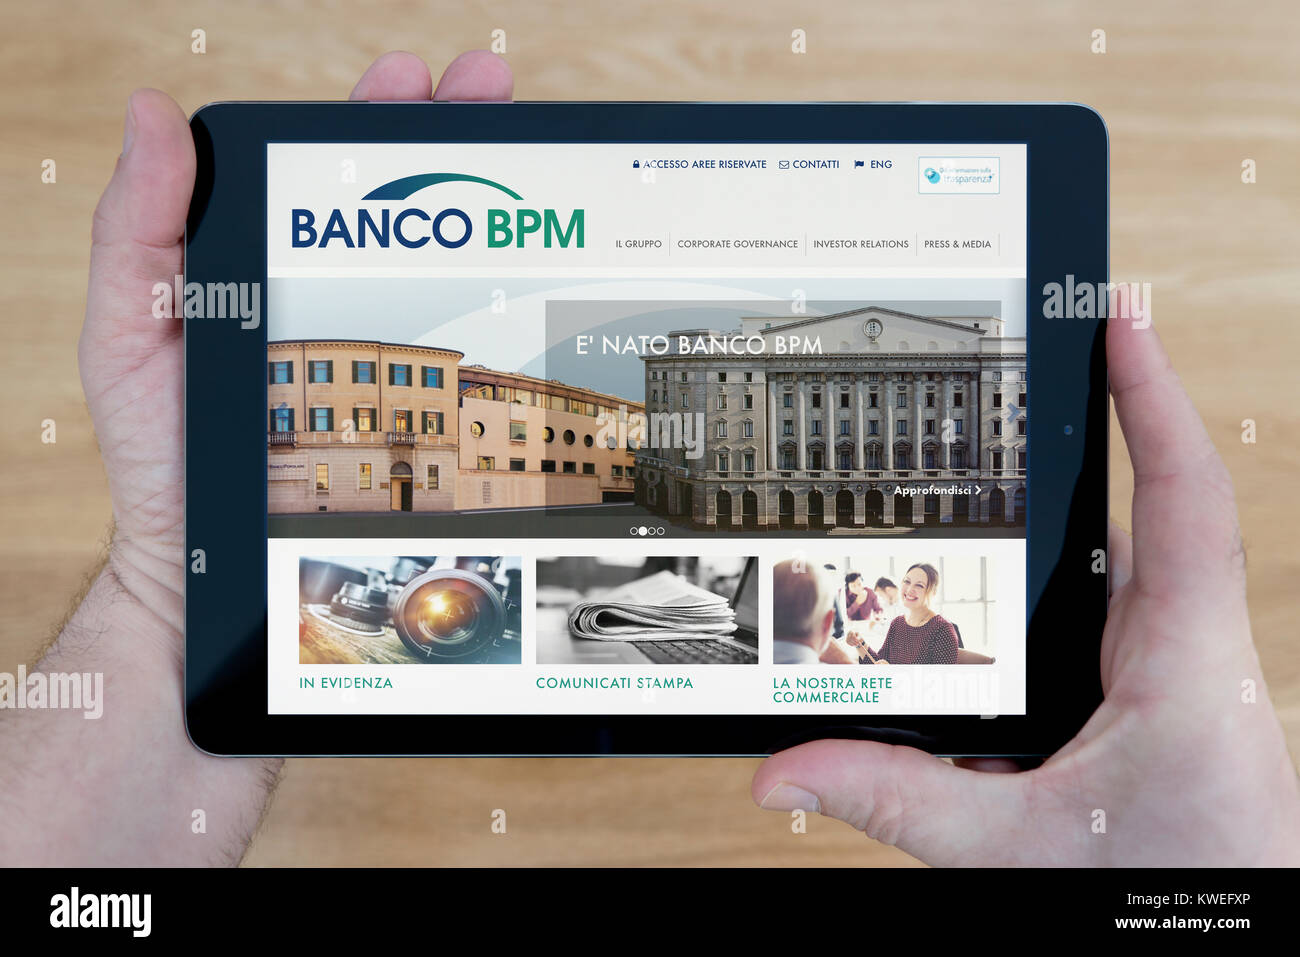 A man looks at the Banco BPM website on his iPad tablet device, shot against a wooden table top background (Editorial use only) Stock Photo